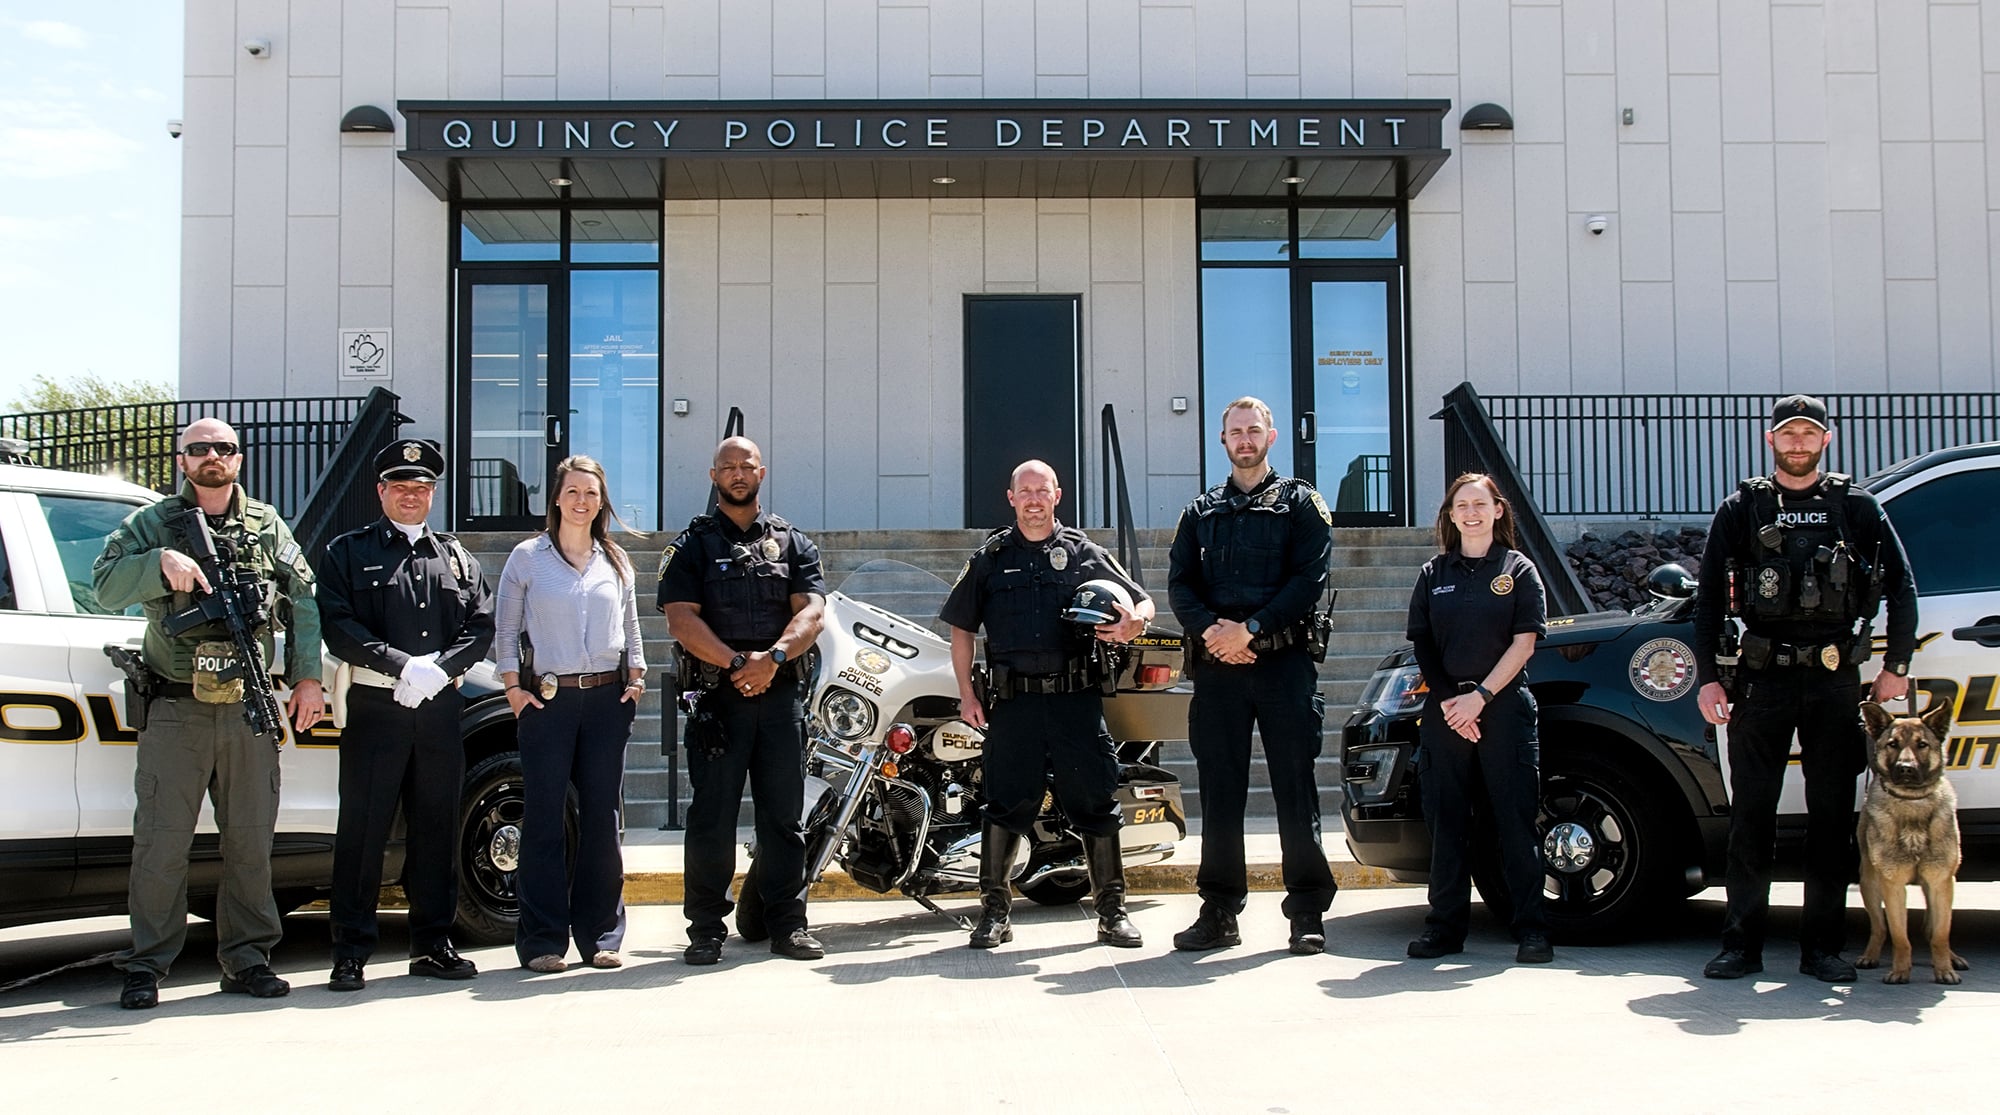 Quincy Police Department - Quincy IL